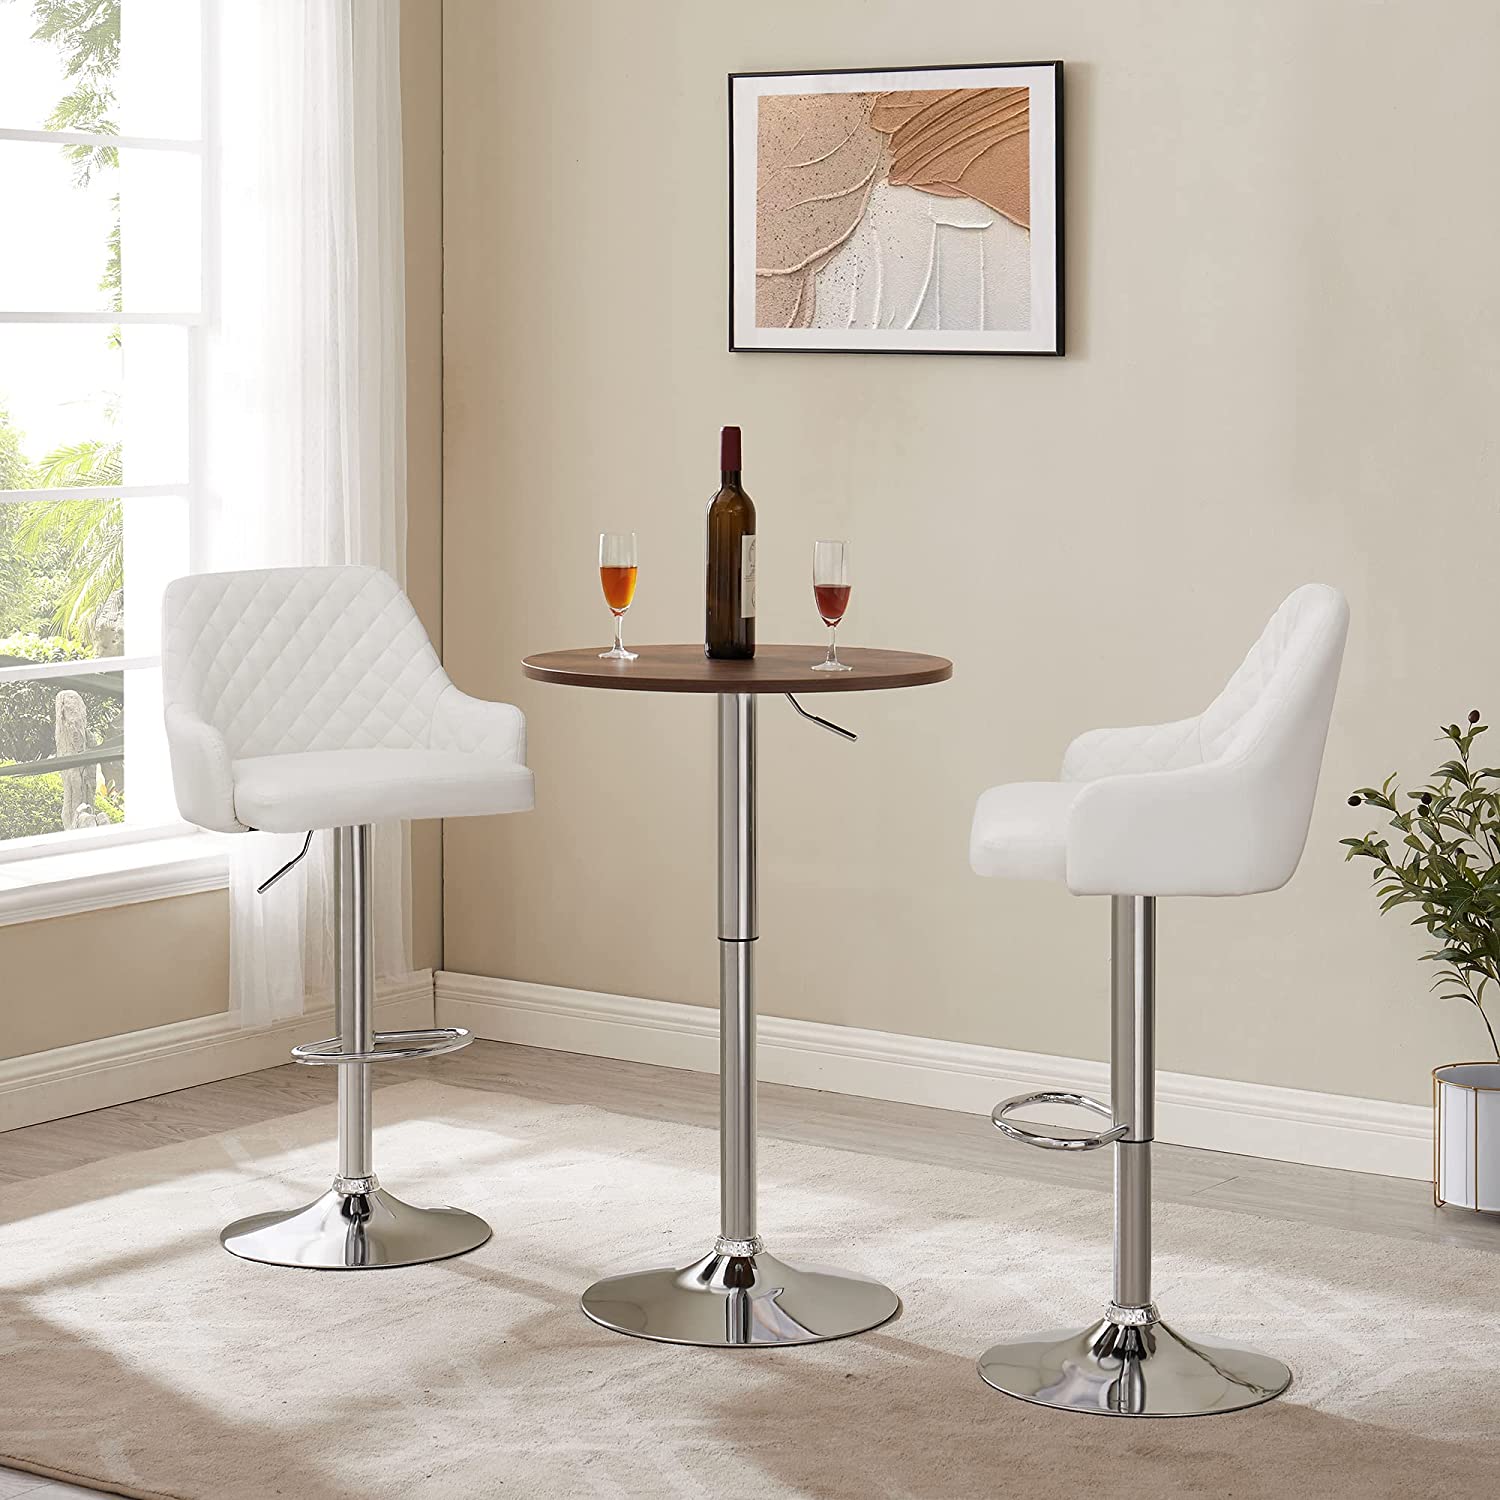 VECELO Bar Stools Set of 2, Kitchen Island Counter Height Chairs with PU Leather Back & Swivel Adjustable Seat